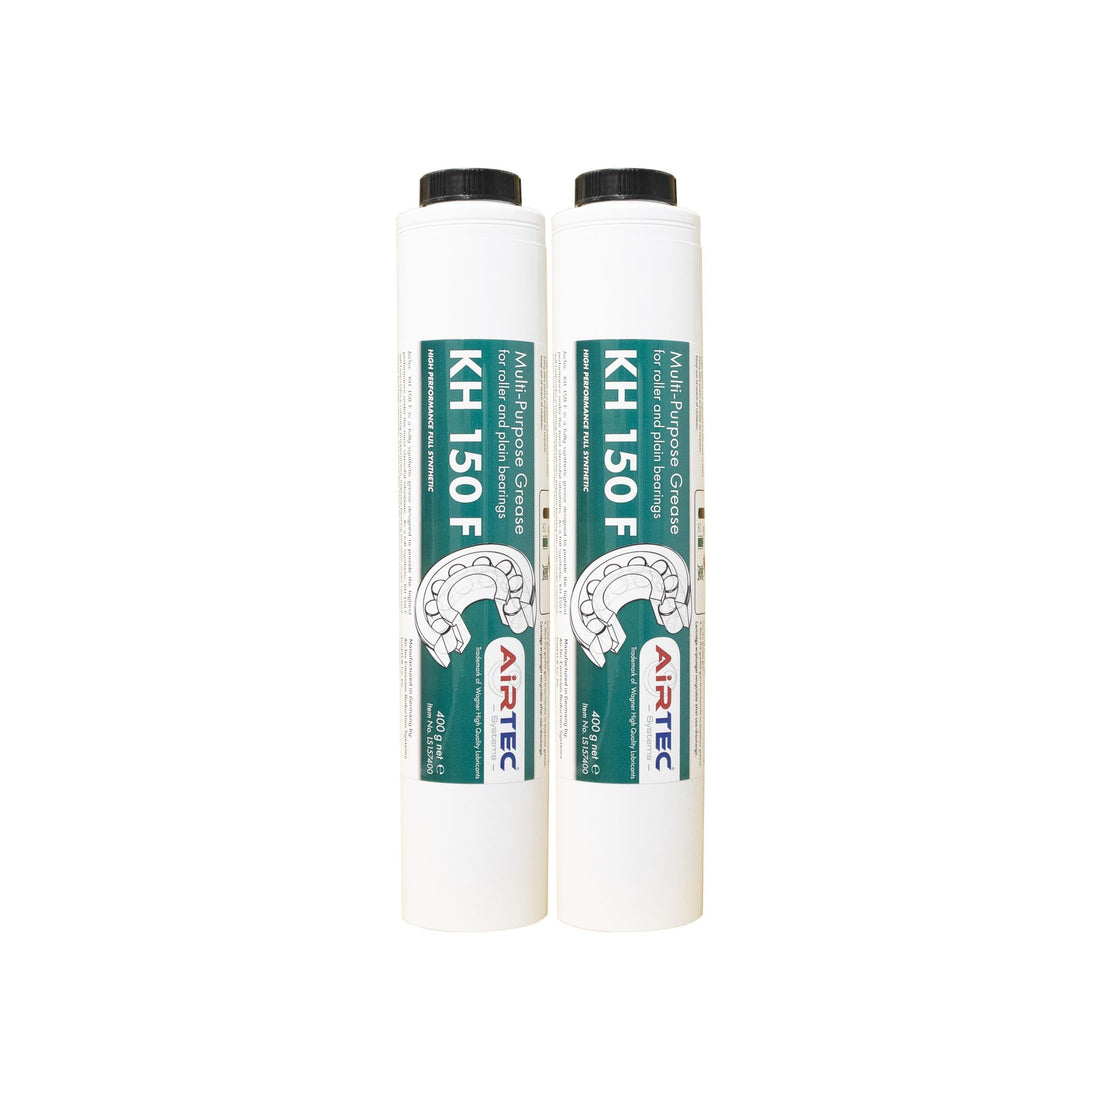 AirTec Grease:  KH150 Full Synthetic